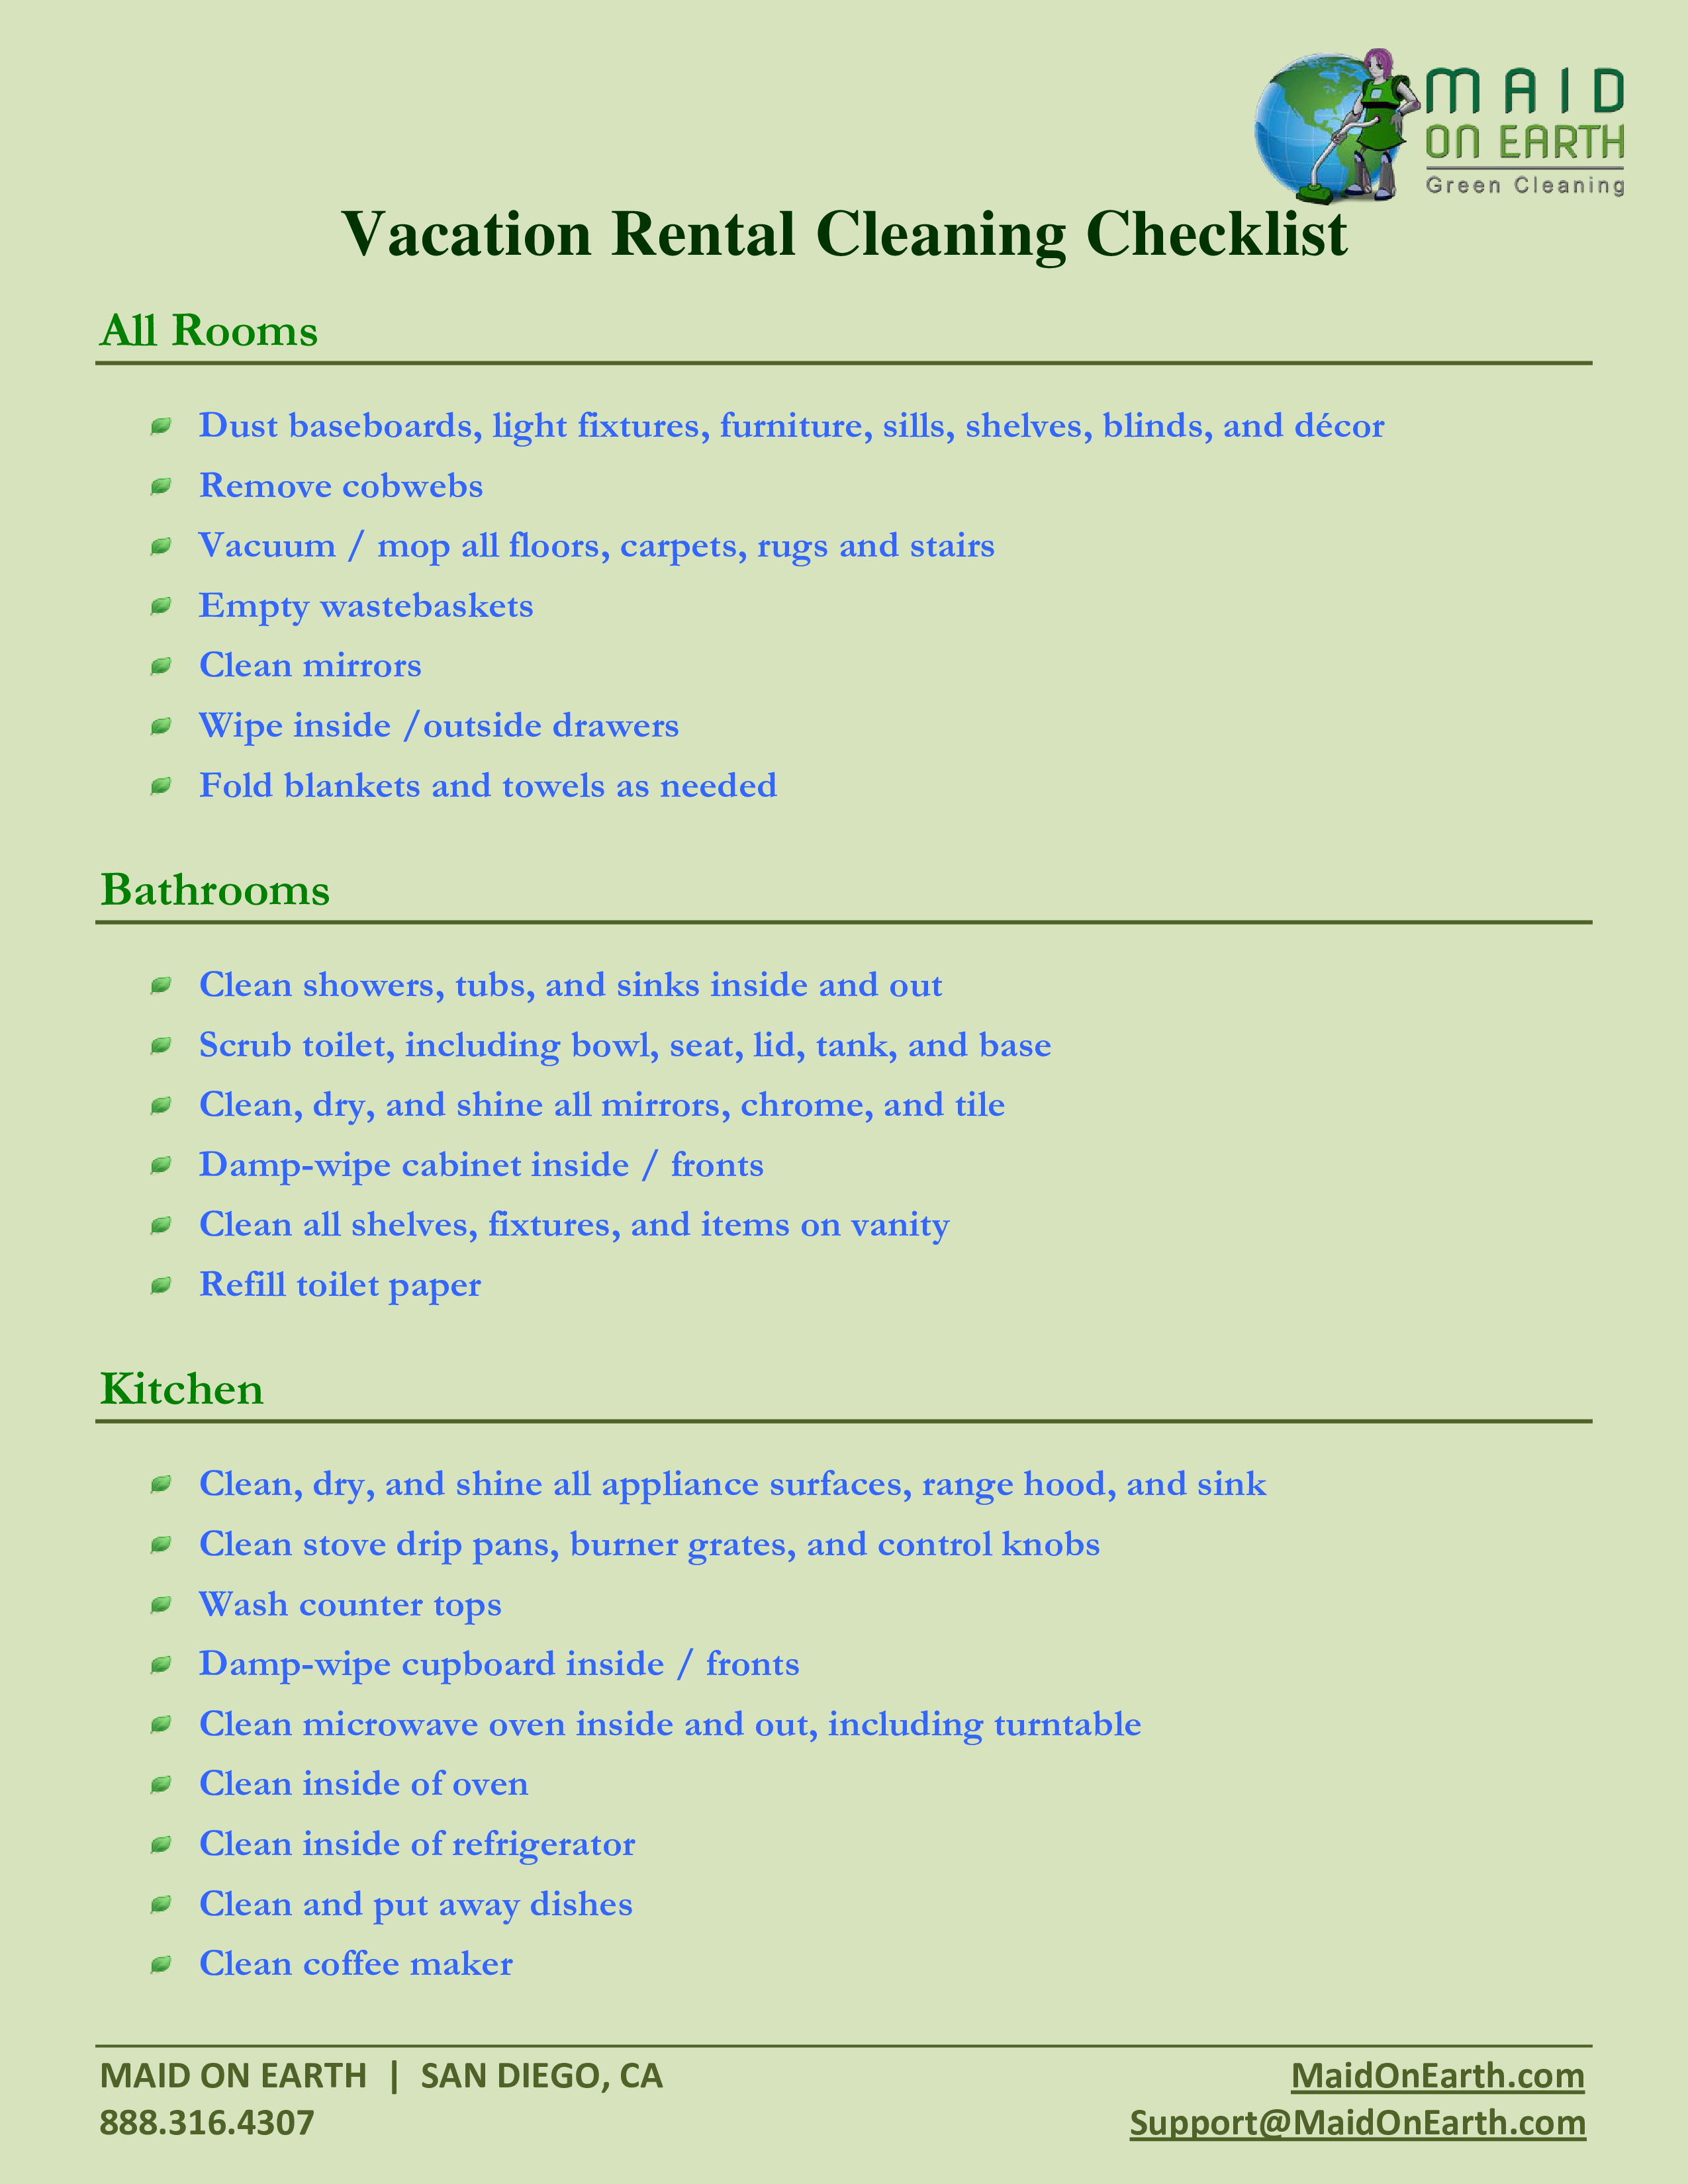 Vacation Rental Cleaning Checklist 模板